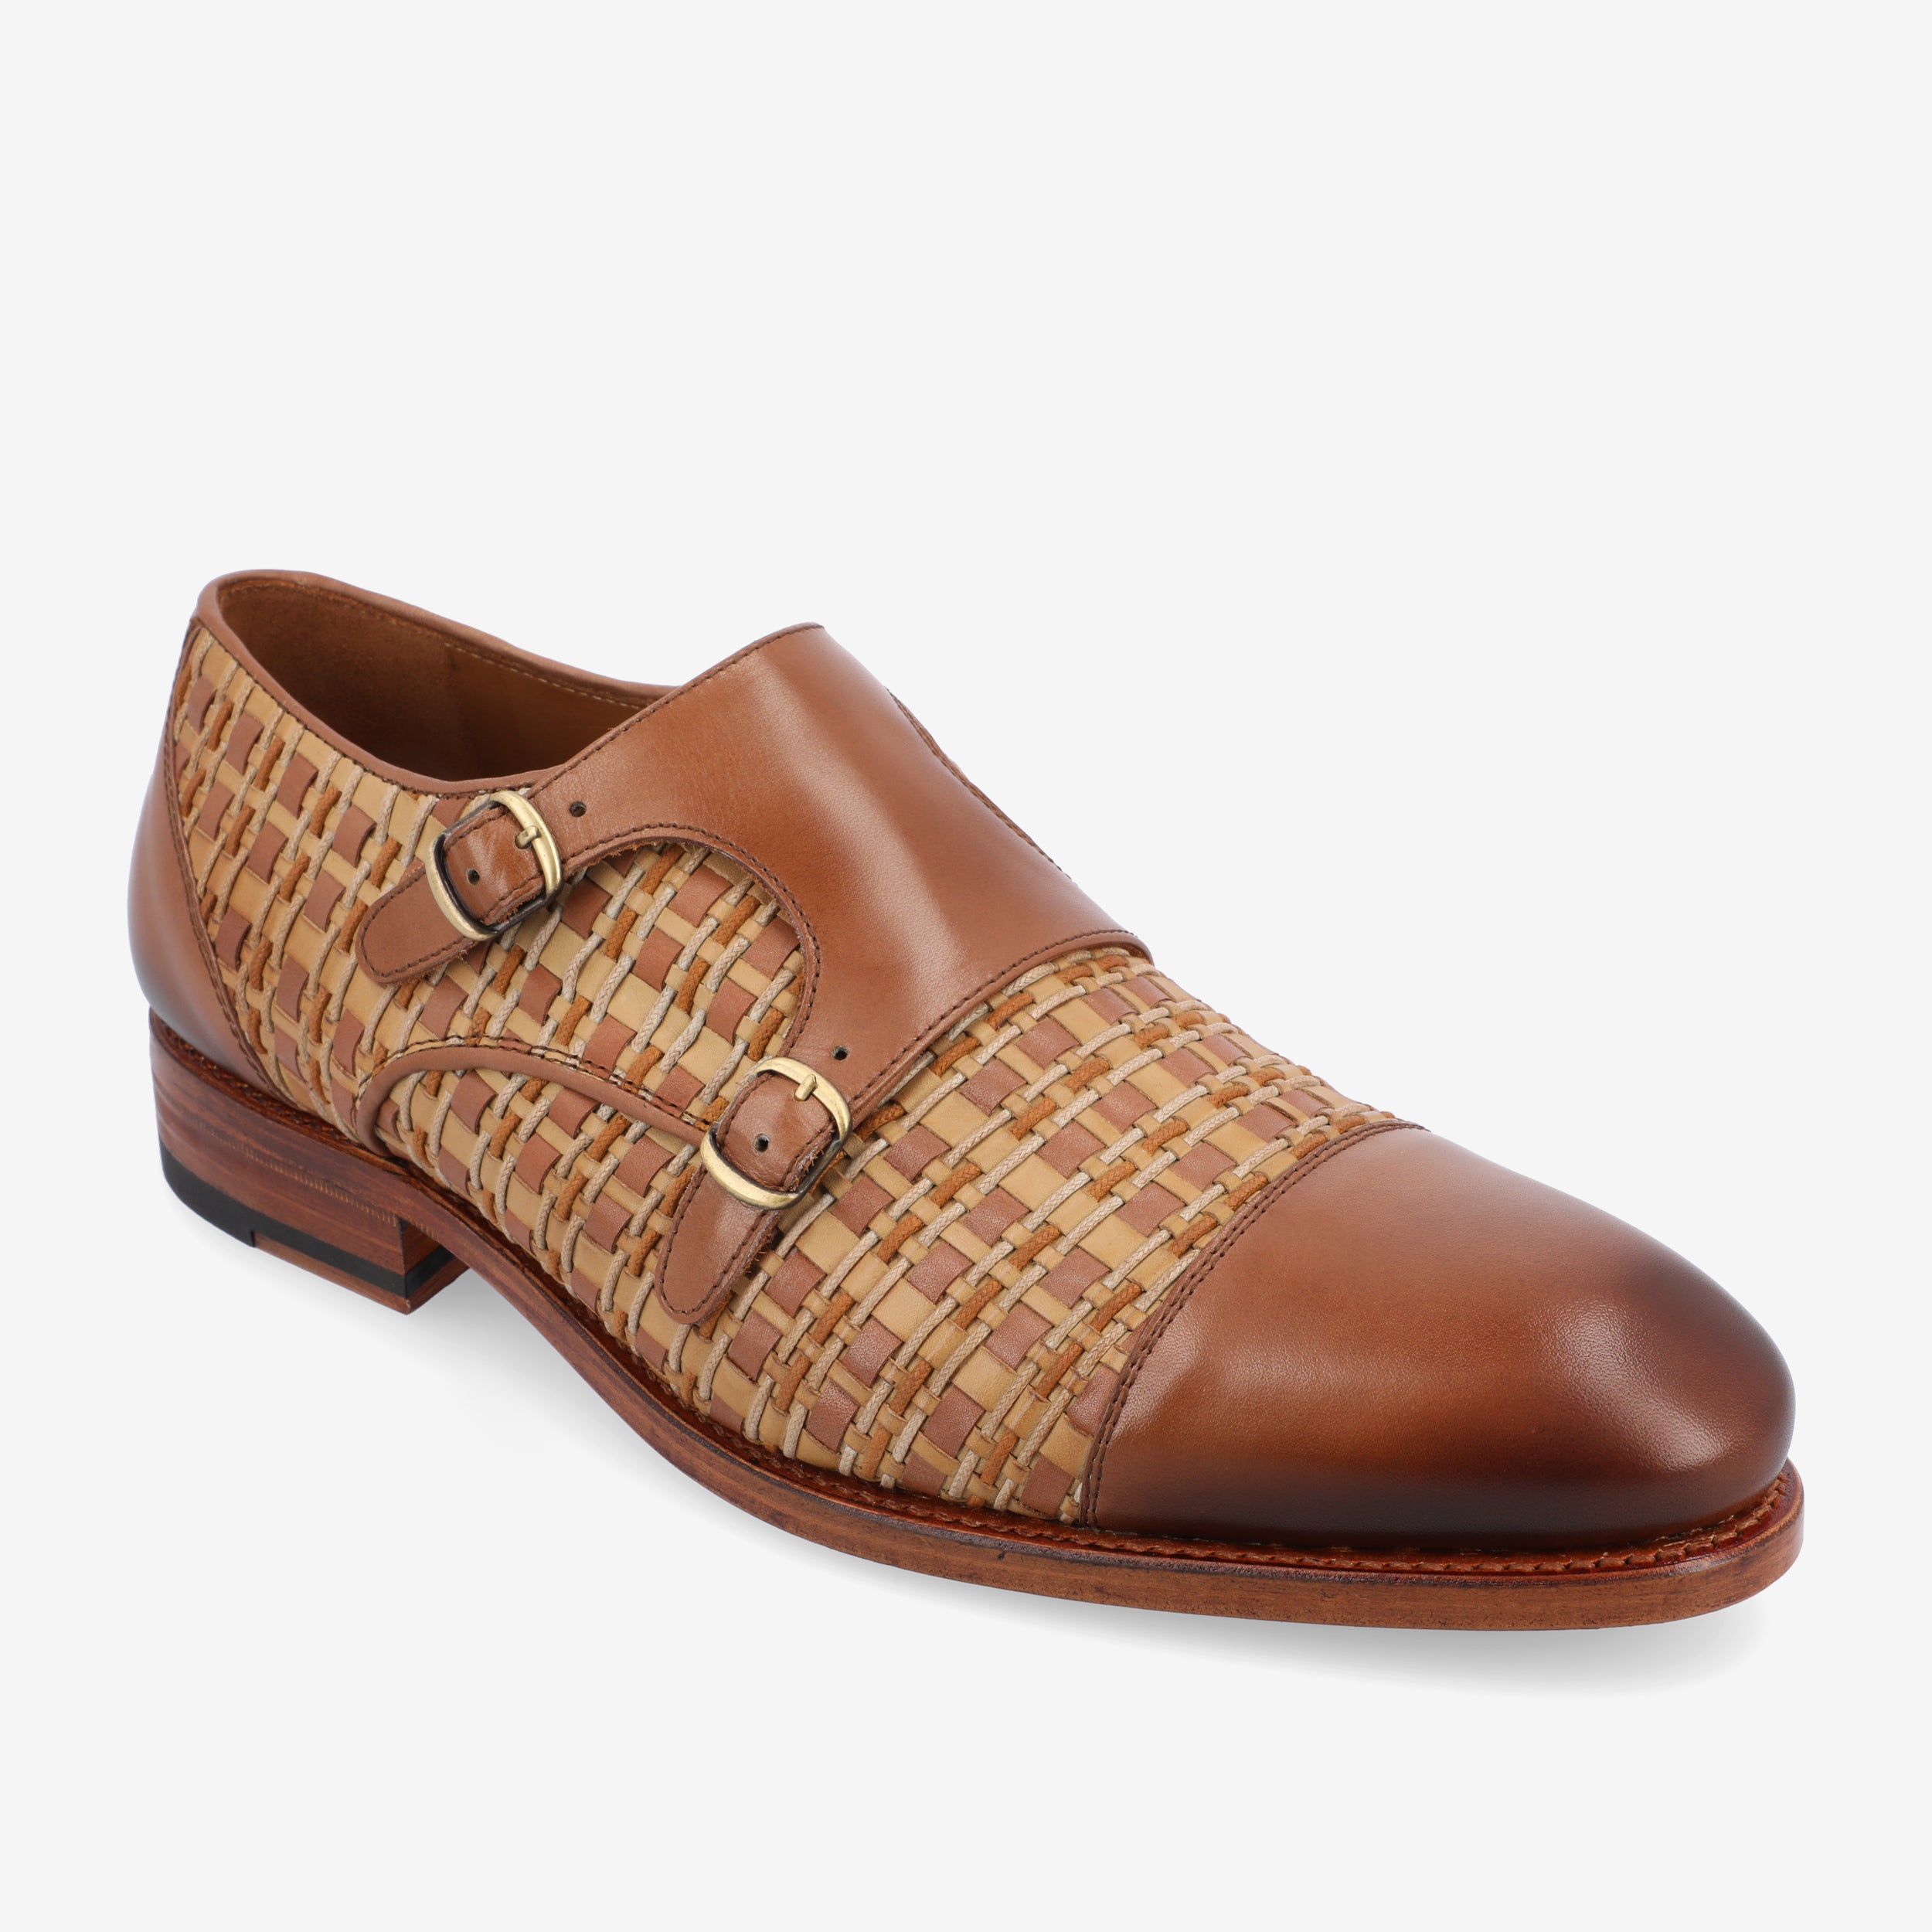 The Lucca Monk Woven in Brown (Last Chance, Final Sale)